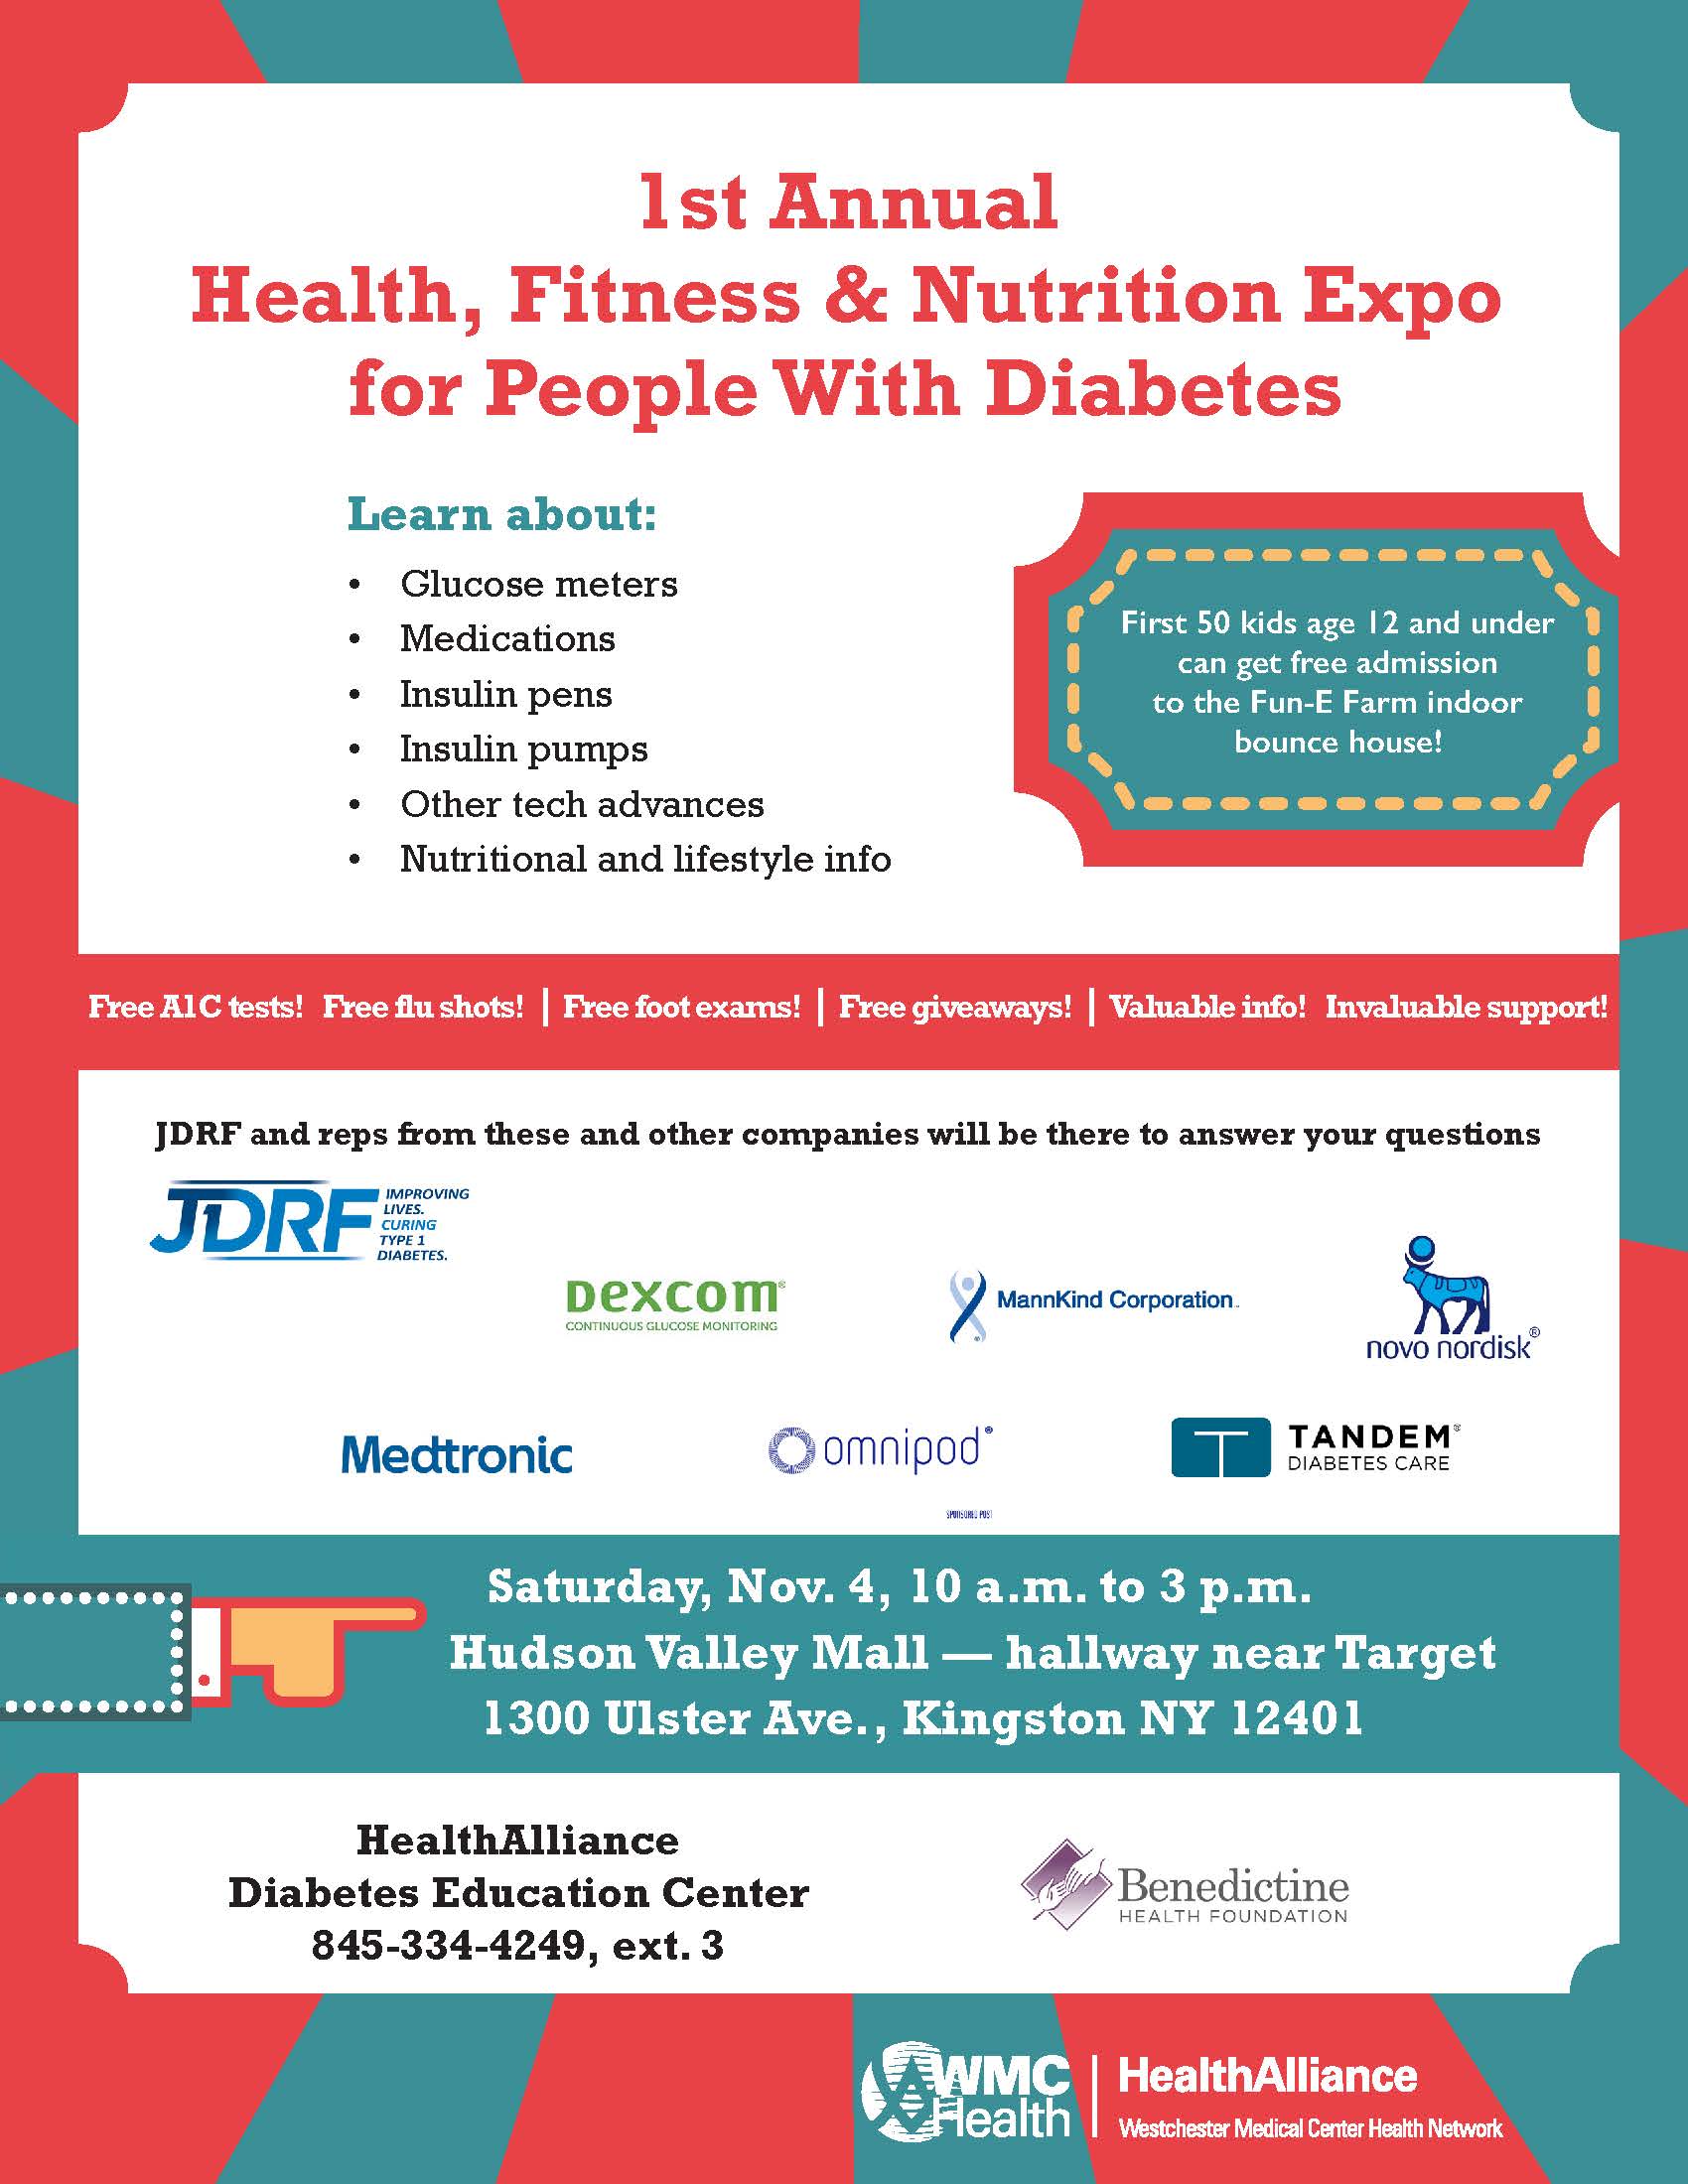 Health, Fitness & Nutrition Expo for People With Diabetes | Upcoming Events